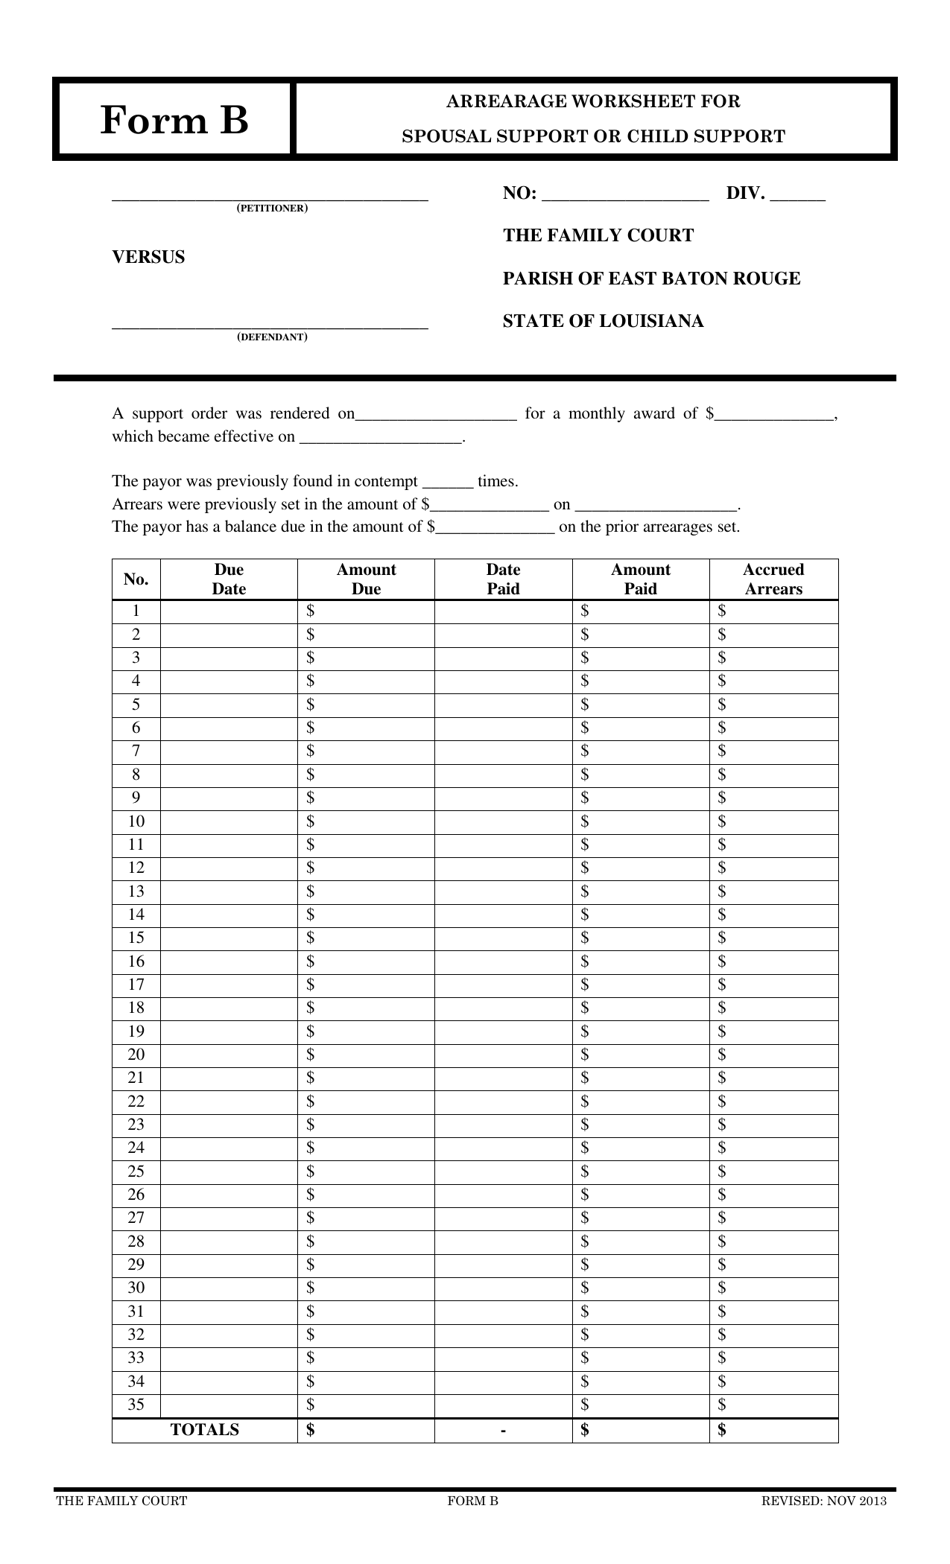 Form B Arrearage Worksheet for Spousal Support or Child Support - Louisiana, Page 1